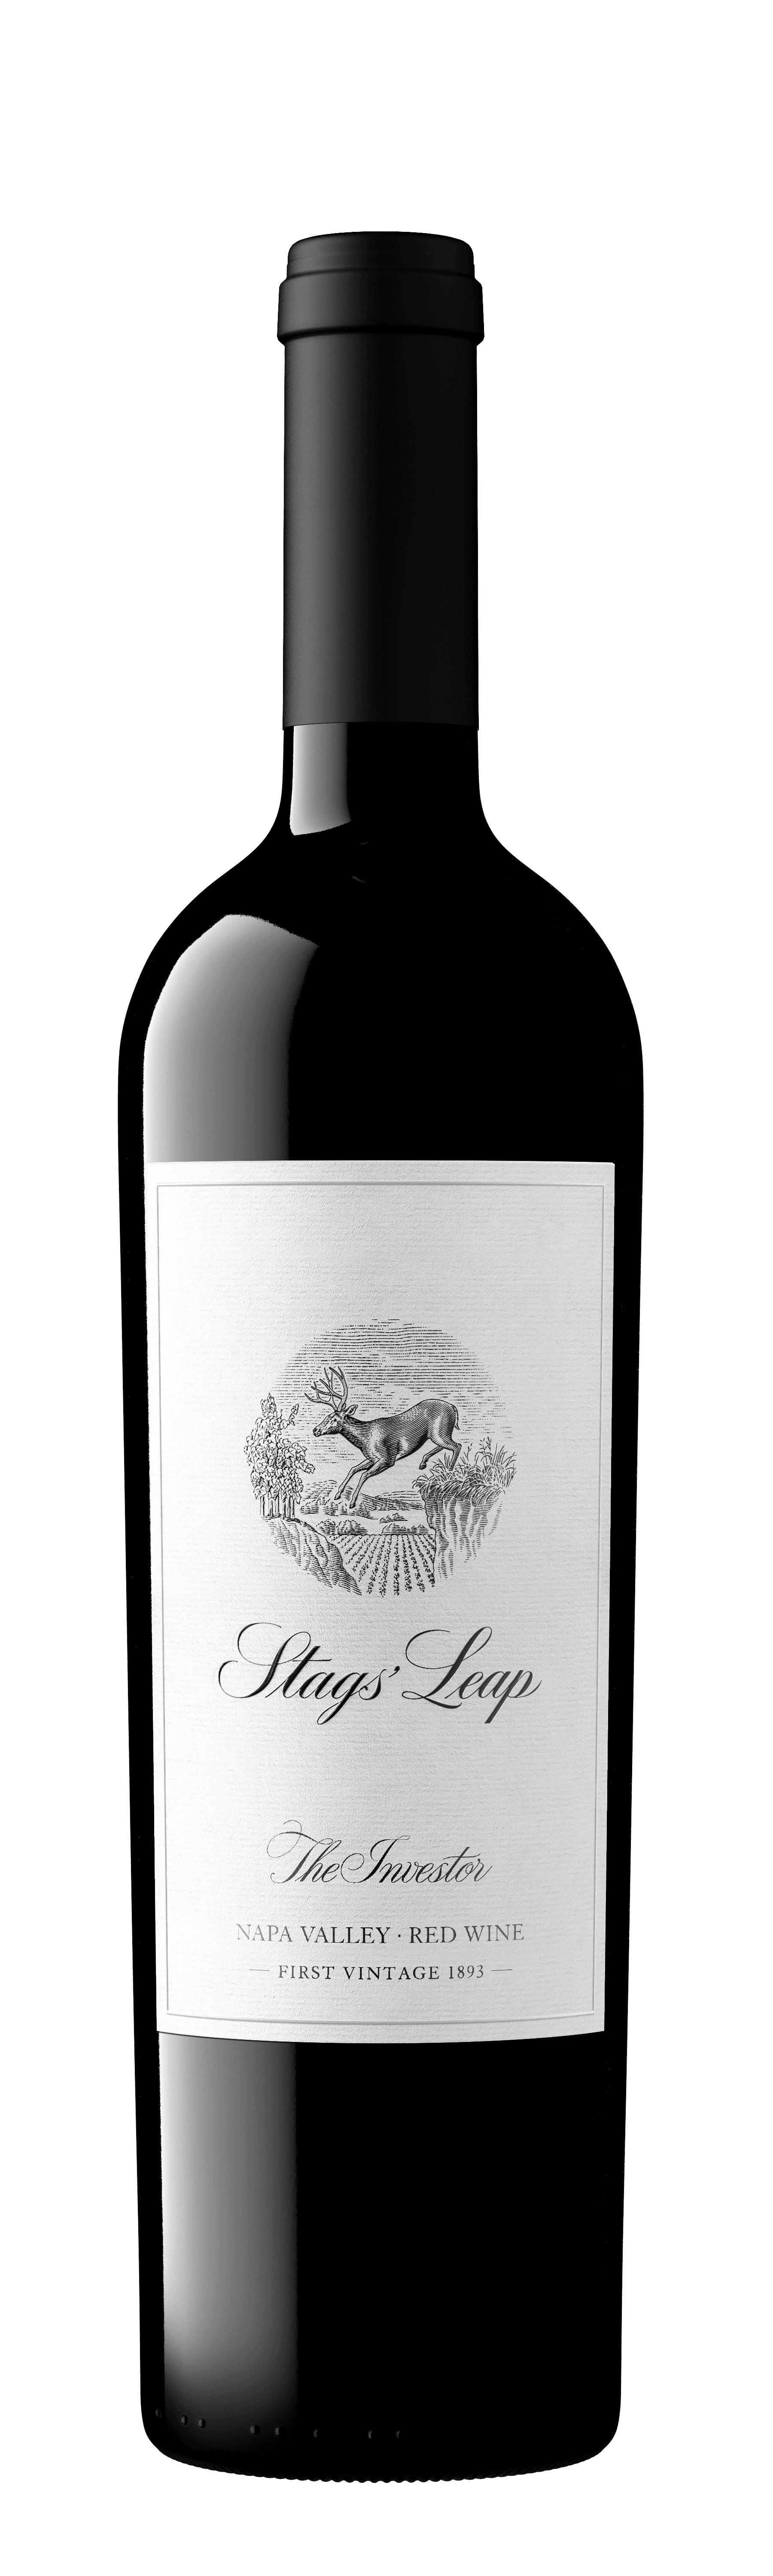 Stags' Leap Winery 'Investor' Napa Valley Red Blend